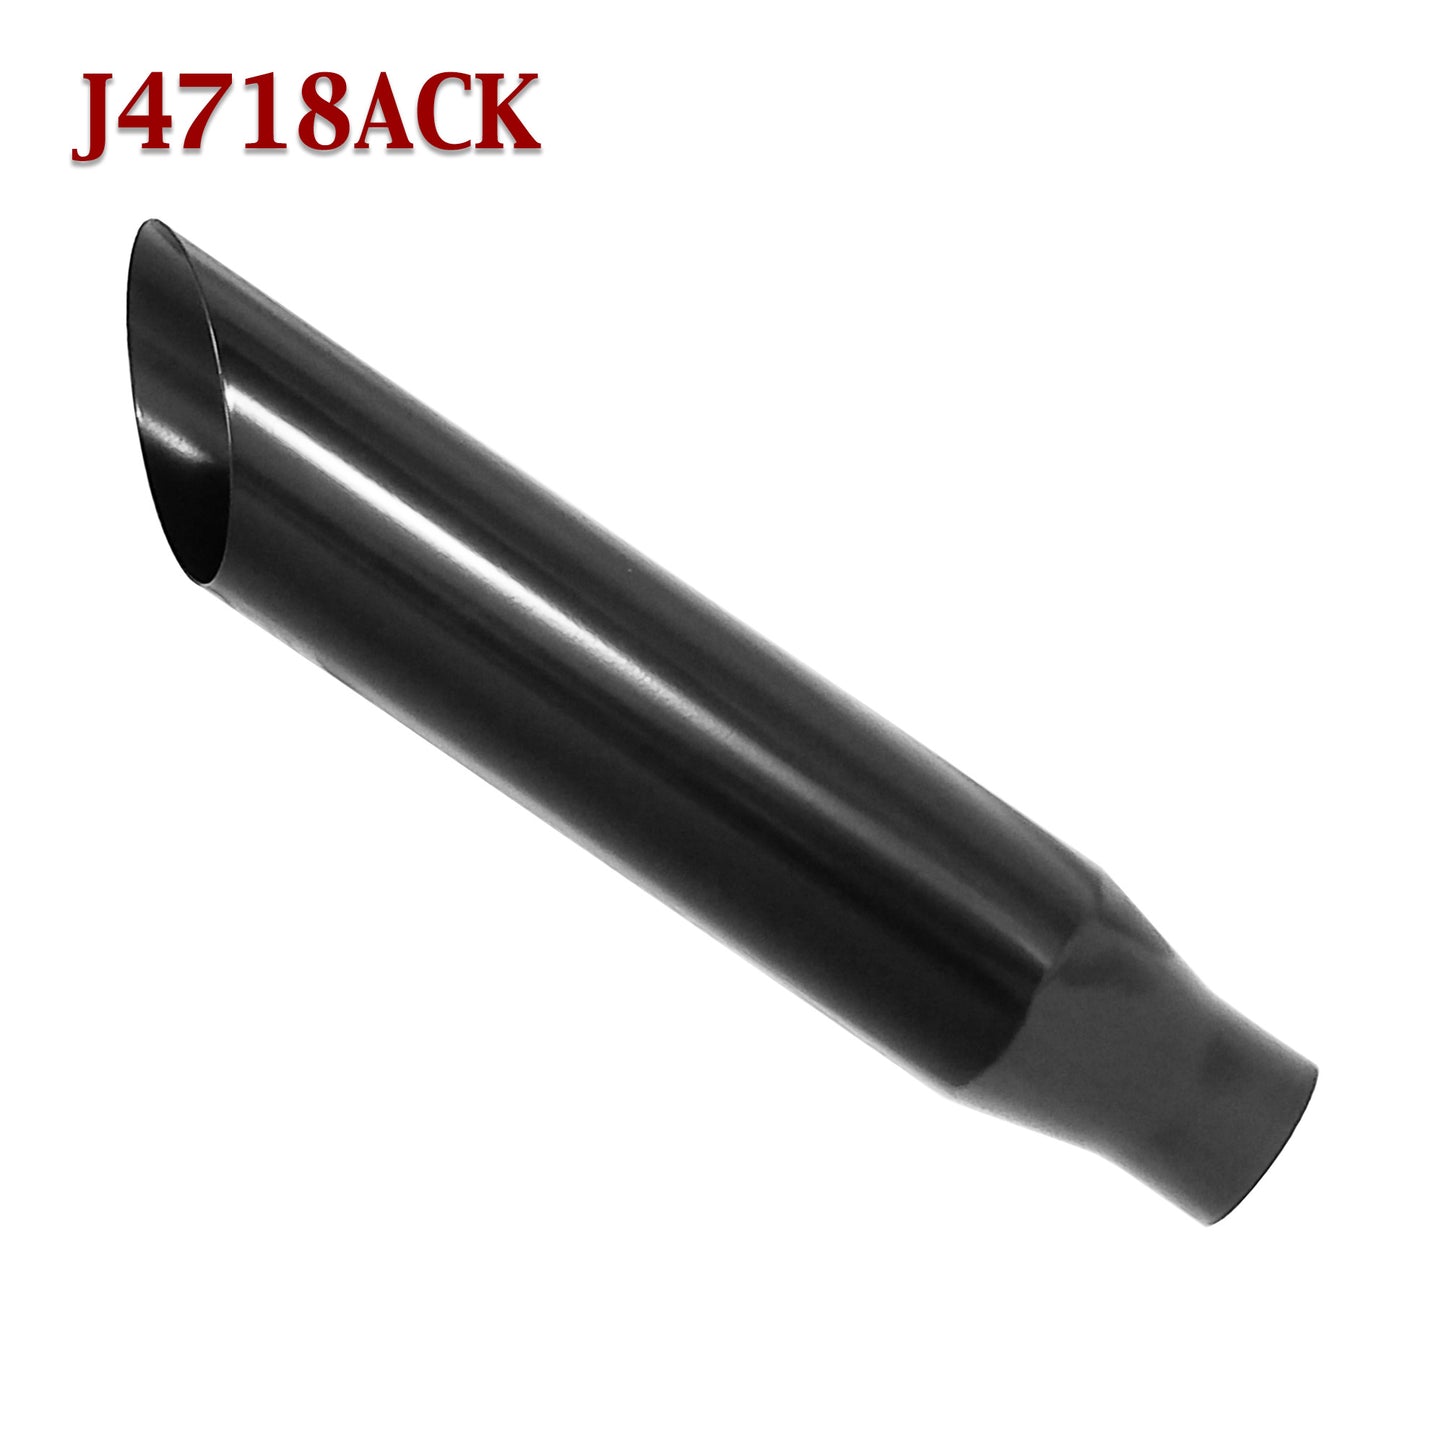 J4718ACK Black Powder Stainless Truck Exhaust Tip 2.25" 2 1/4" Inlet 18" Long